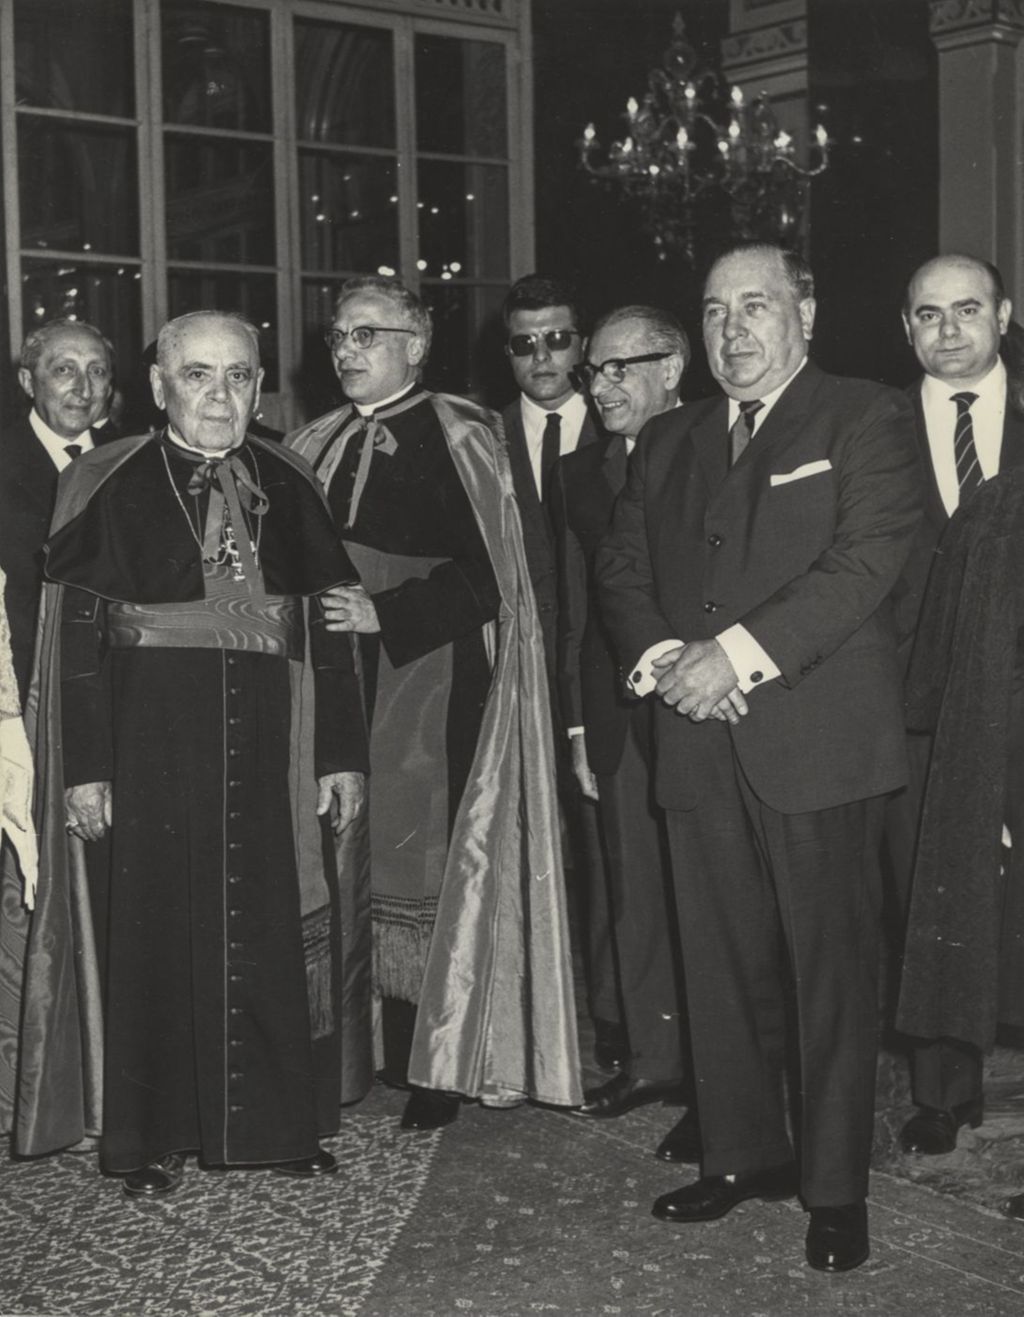 Richard J. Daley, Colonel Frank Chesrow and clerics at reception in Rome